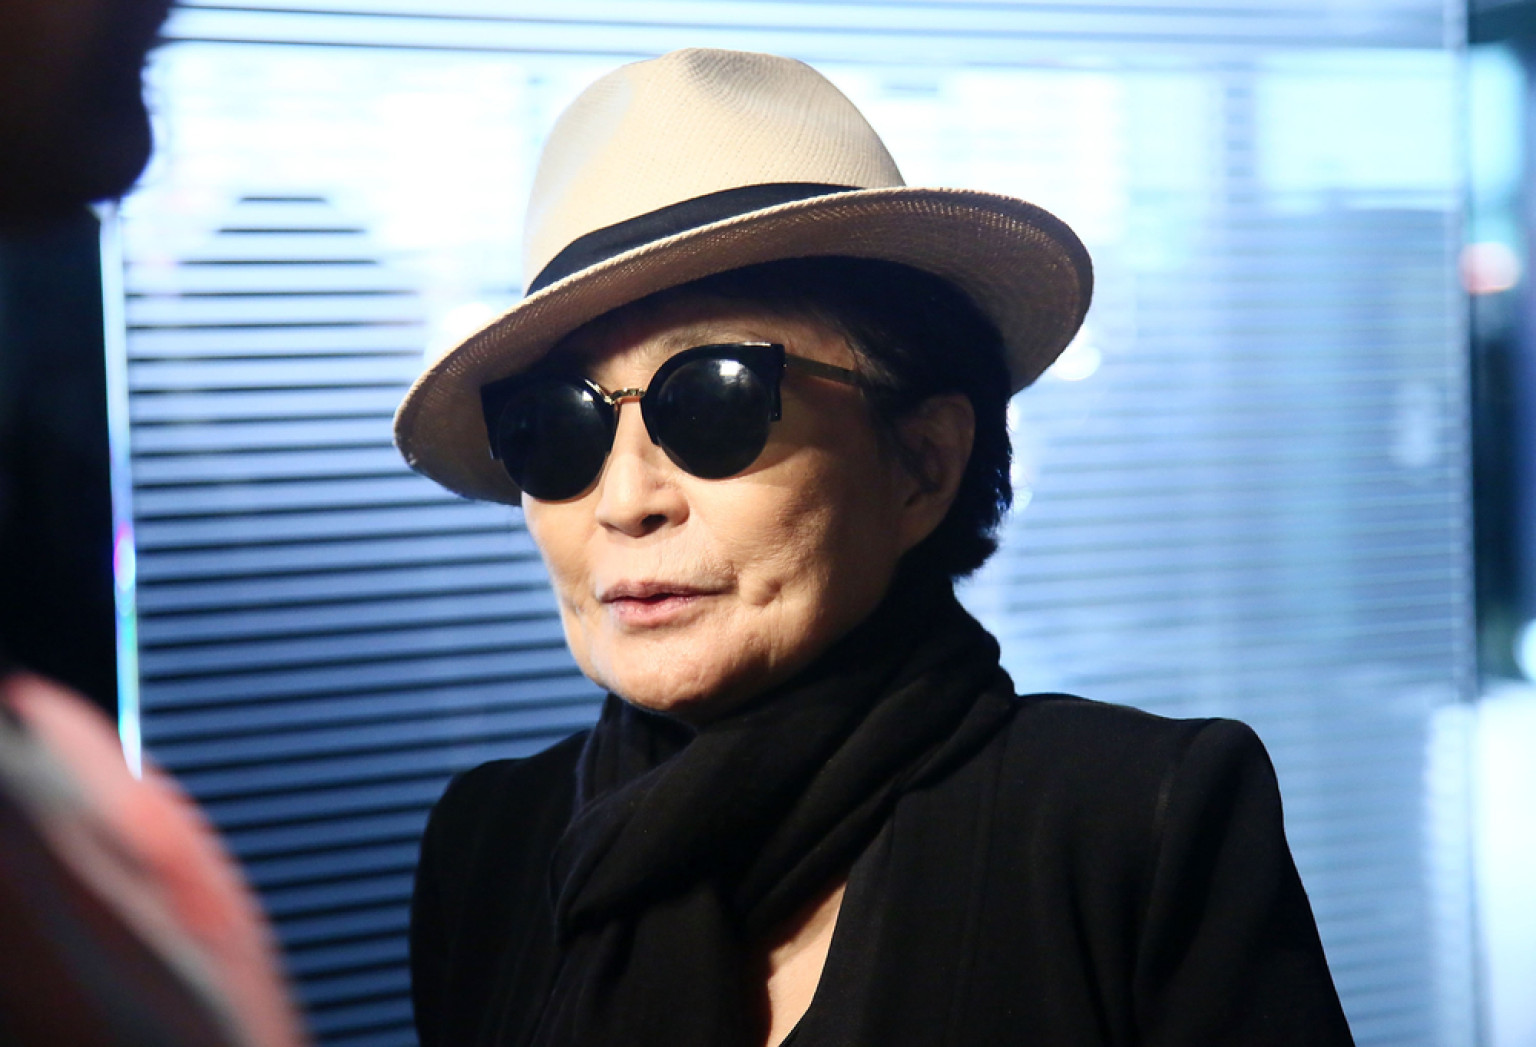 Yoko Ono Quotes: The Best Advice From The Artist's New Book, 'Acorn